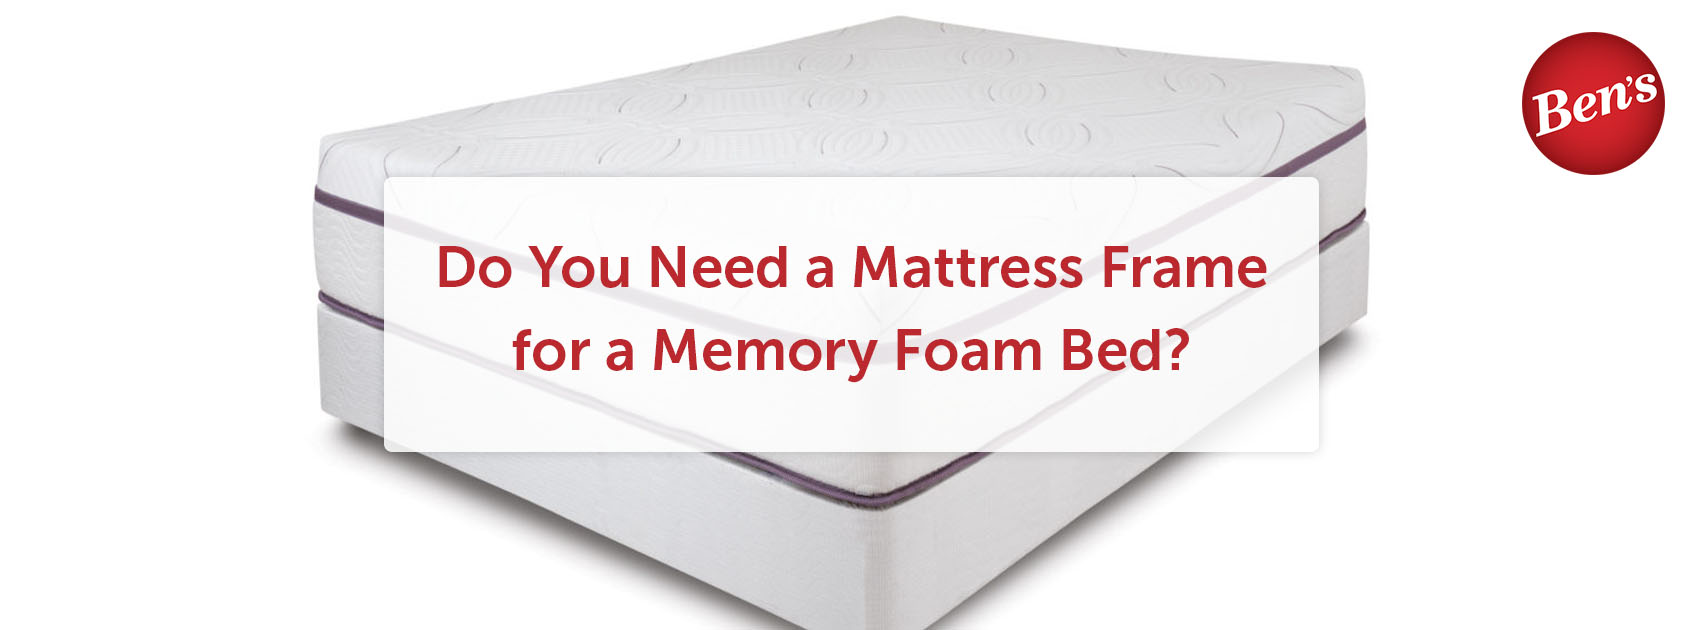 High-quality memory foam bed with a white background.